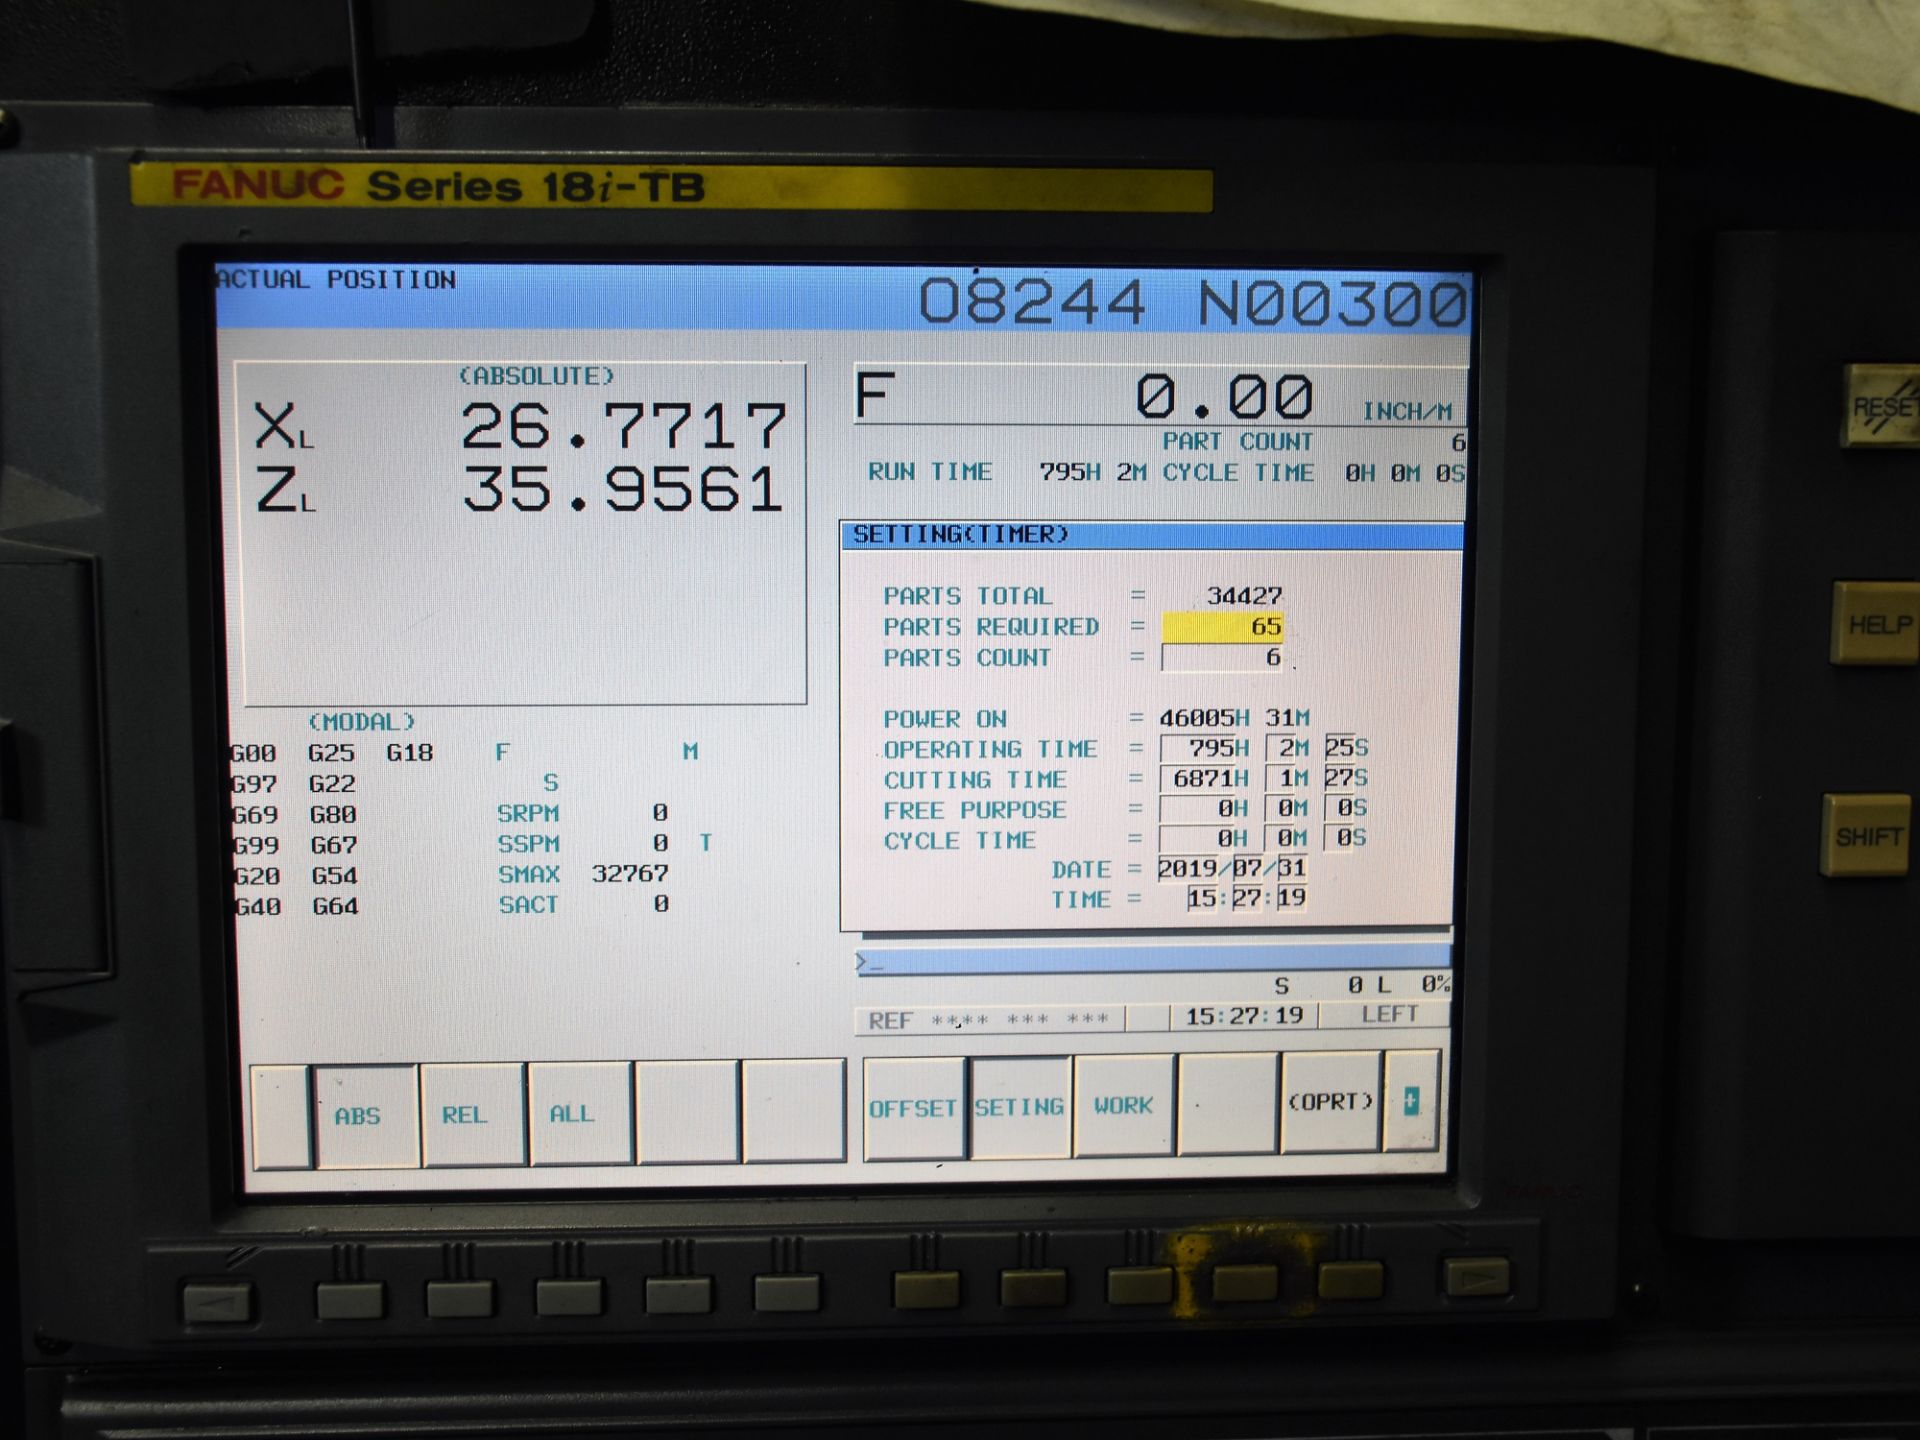 DOOSAN PUMA V550-2SP TWIN SPINDLE CNC VERTICAL TURNING CENTER, WITH FANUC SERIES 18i-TB CNC CONTROLS - Image 4 of 10